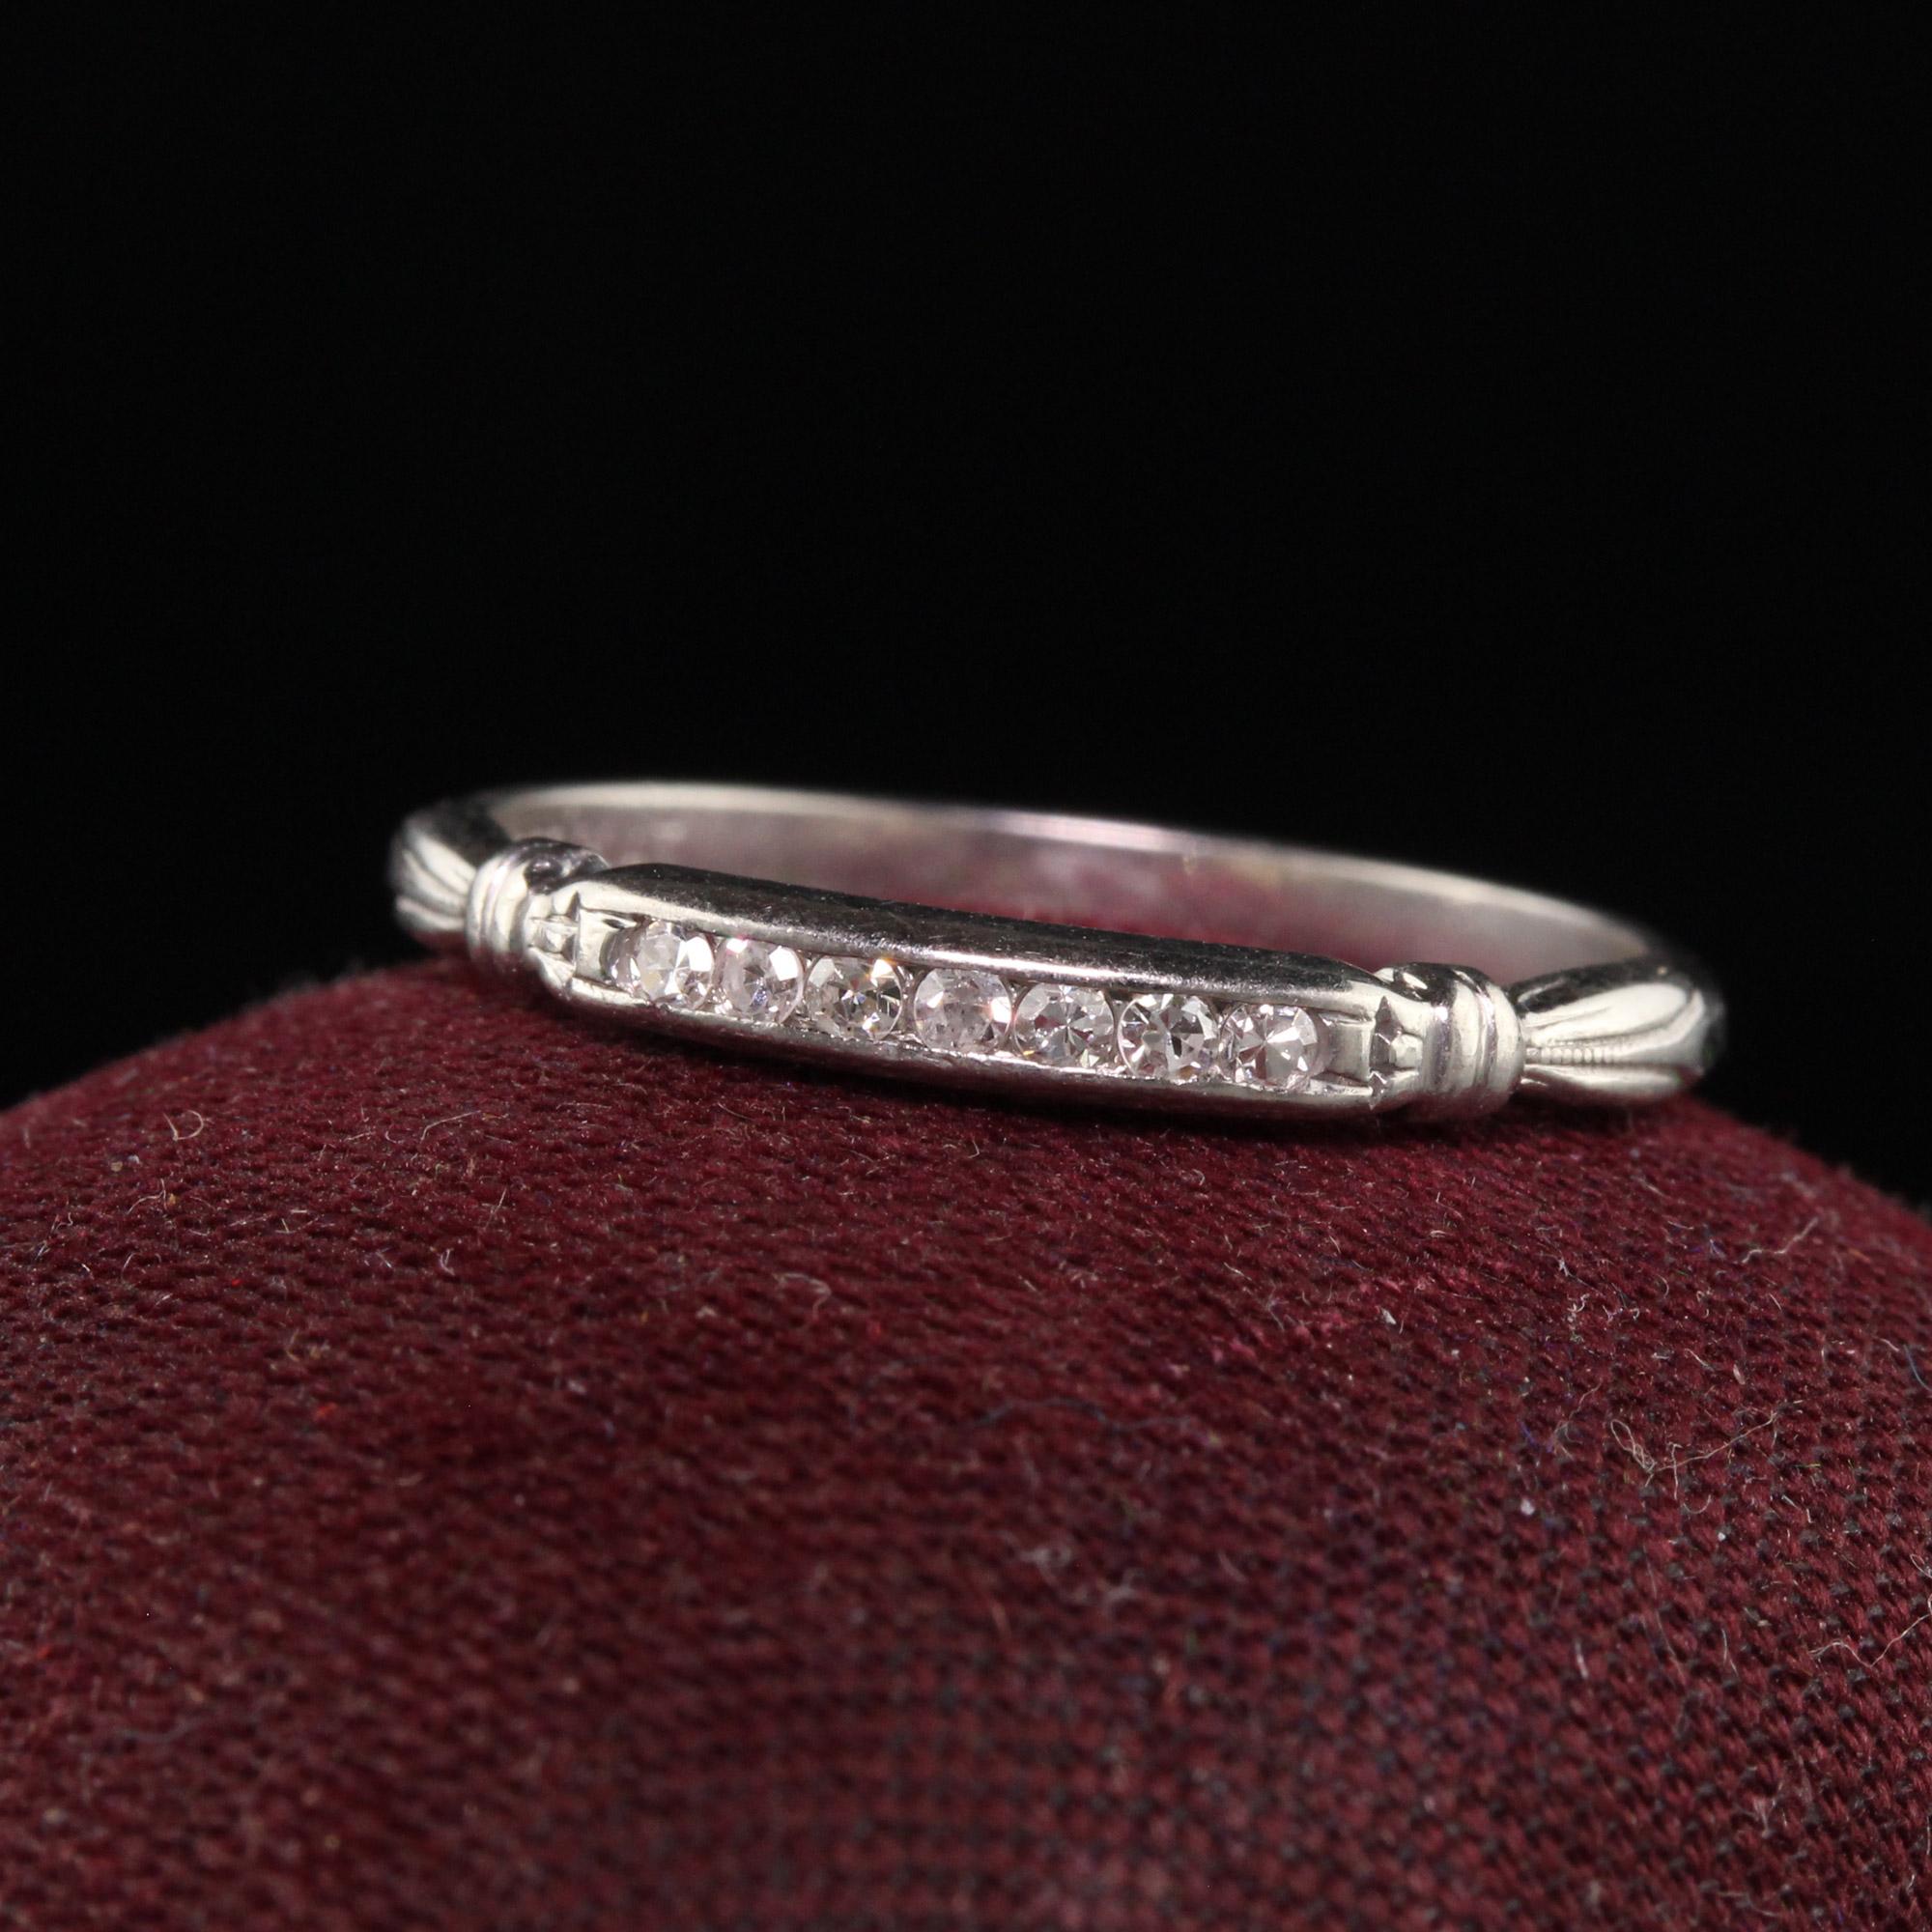 Beautiful Antique Art Deco Platinum Single Cut Diamond Wedding Band. This beautiful band is crafted in platinum. There are single cut diamonds on the top half of the ring in a beautiful art deco mounting.

Item #R1368

Metal: Platinum

Weight: 2.4